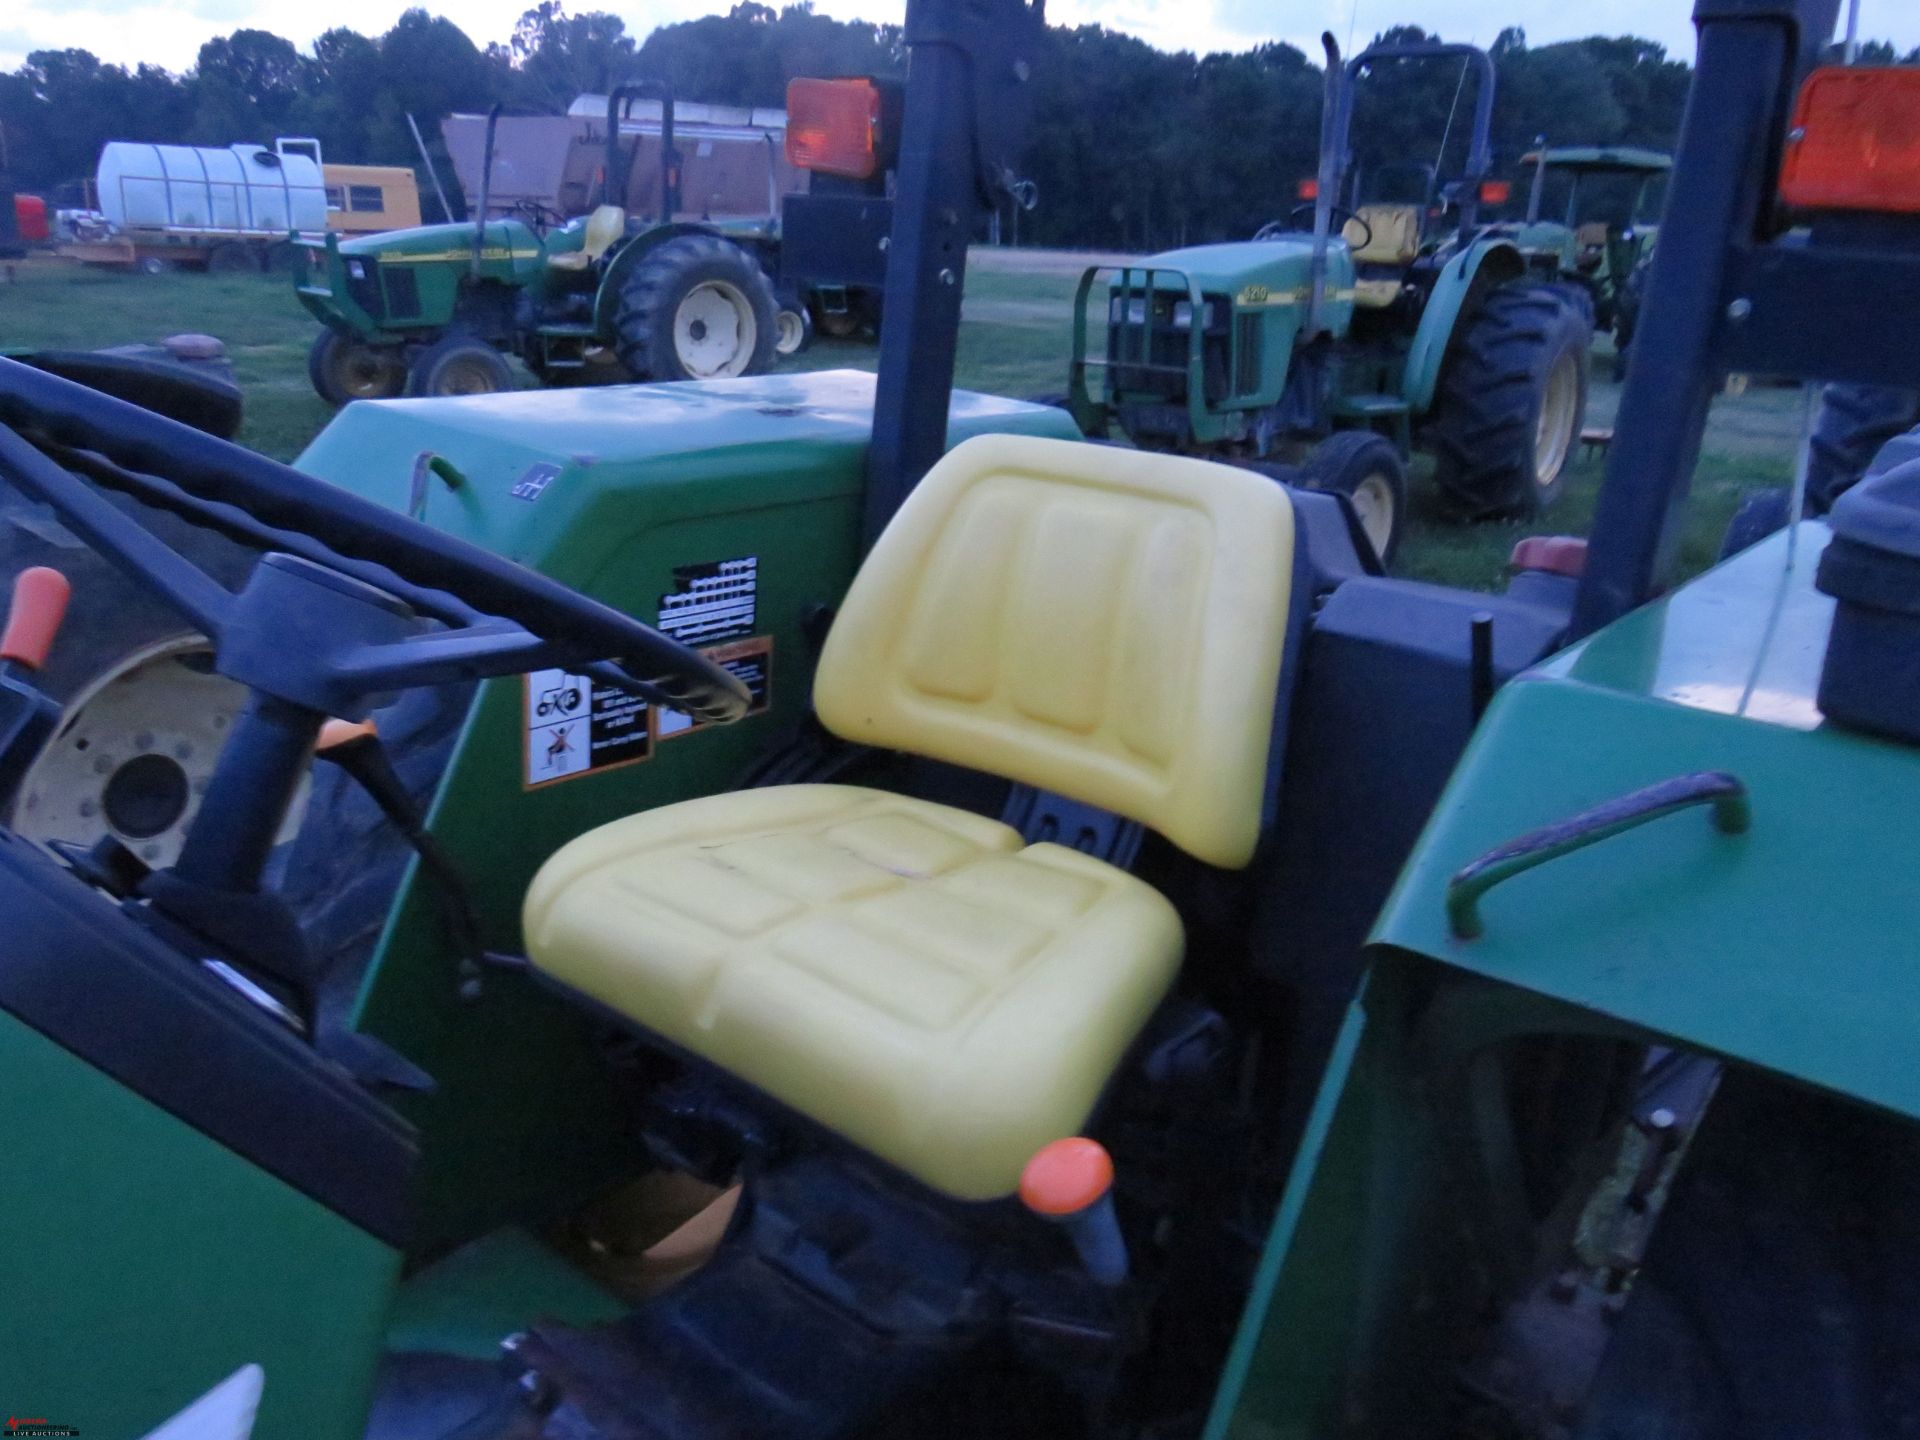 2007 JOHN DEERE 5103 TRACTOR, 3PT, NO TOP LINK, HAS PTO, 13.6-28 REAR TIRES, HOURS NOT AVAILABLE - Image 6 of 8